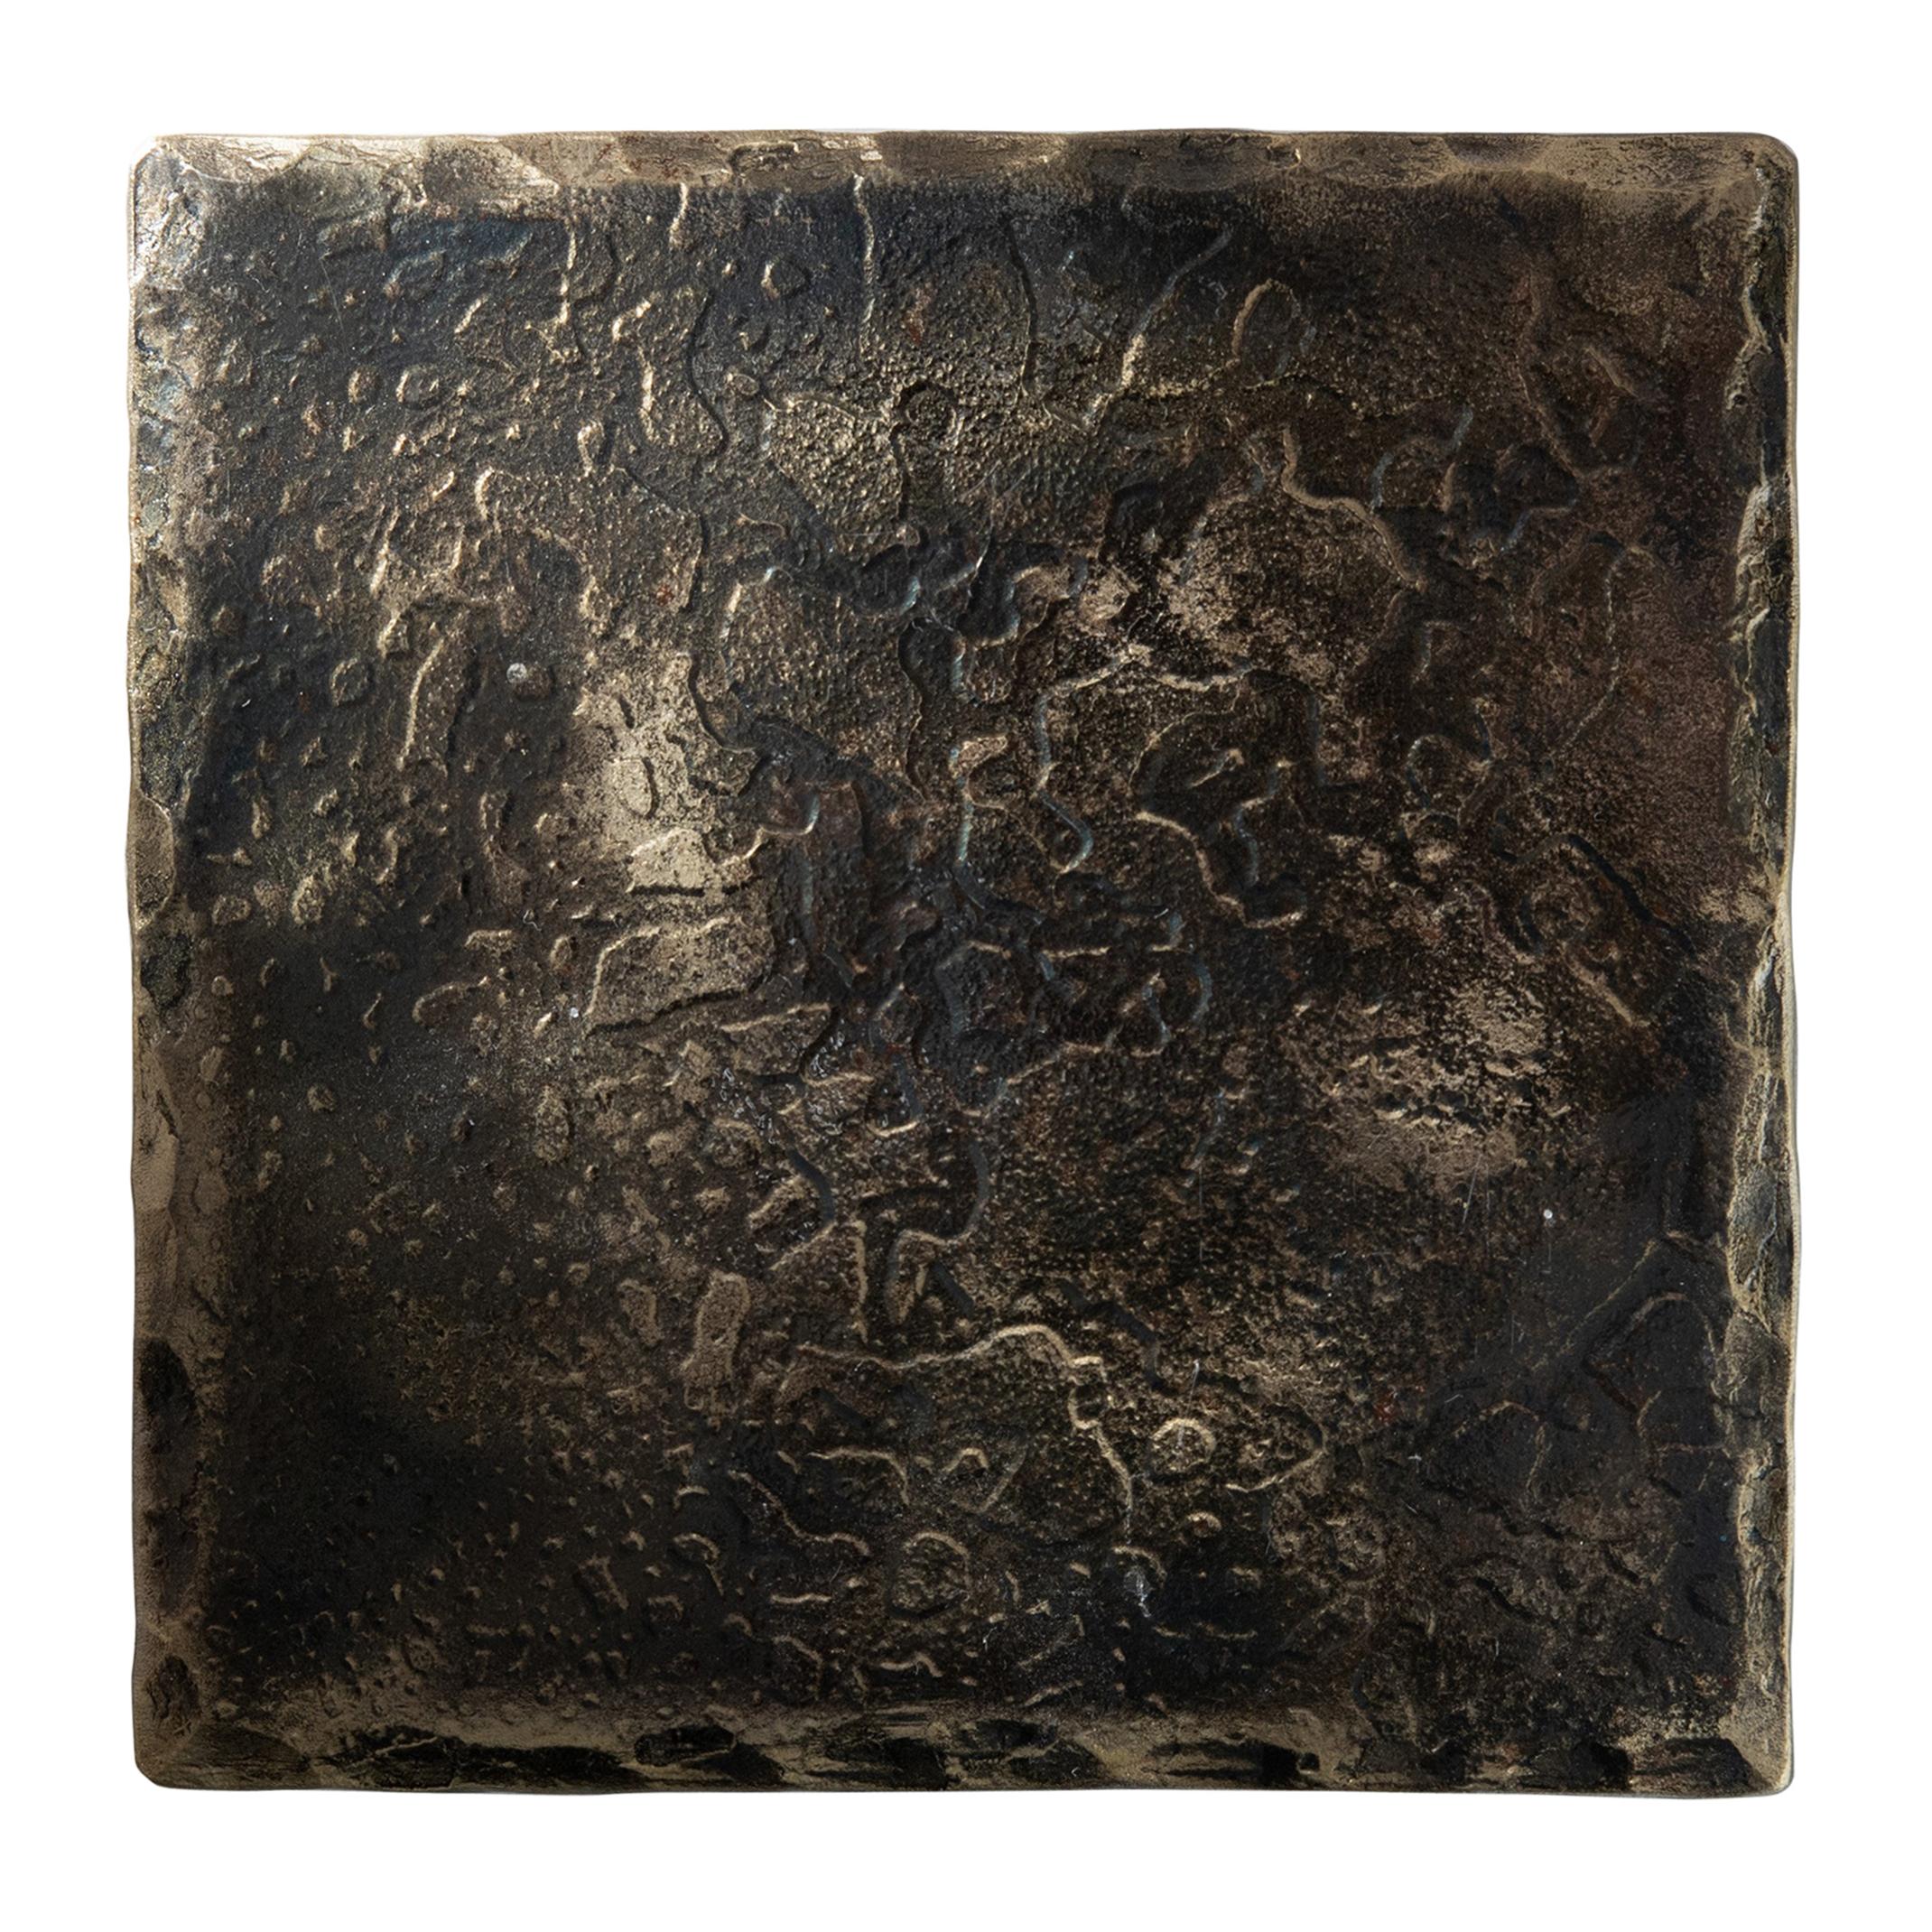 Forge Blackened Steel Square Coaster with Brass Highlights